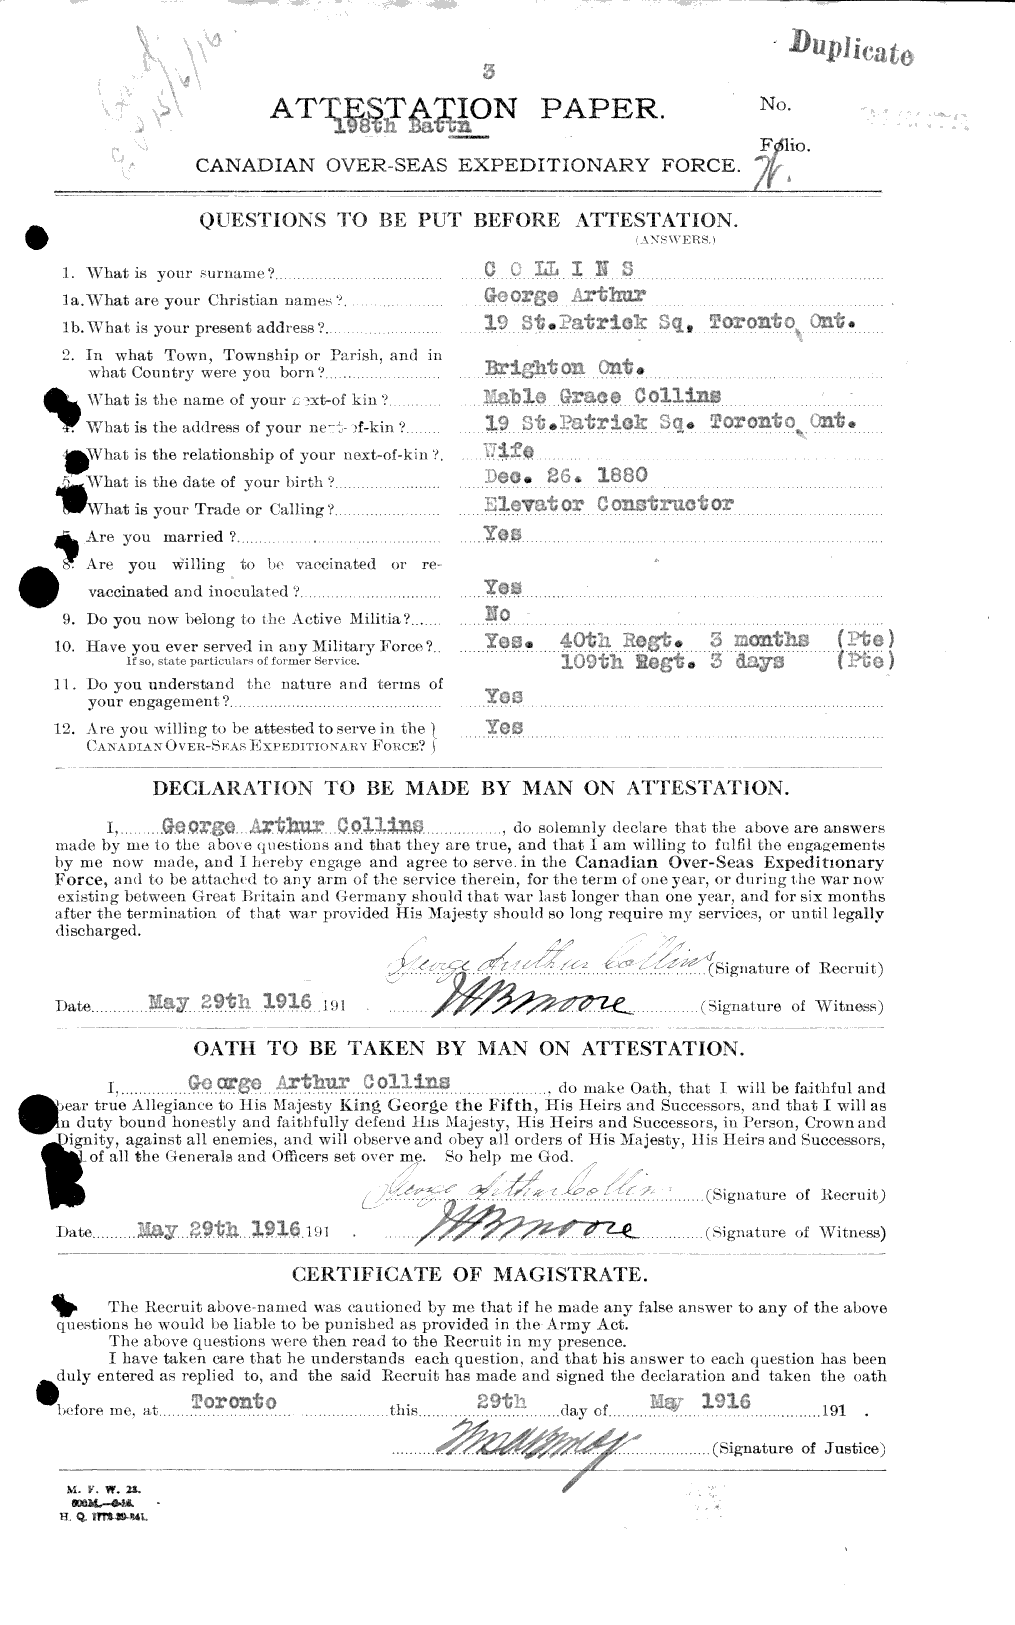 Personnel Records of the First World War - CEF 037855a